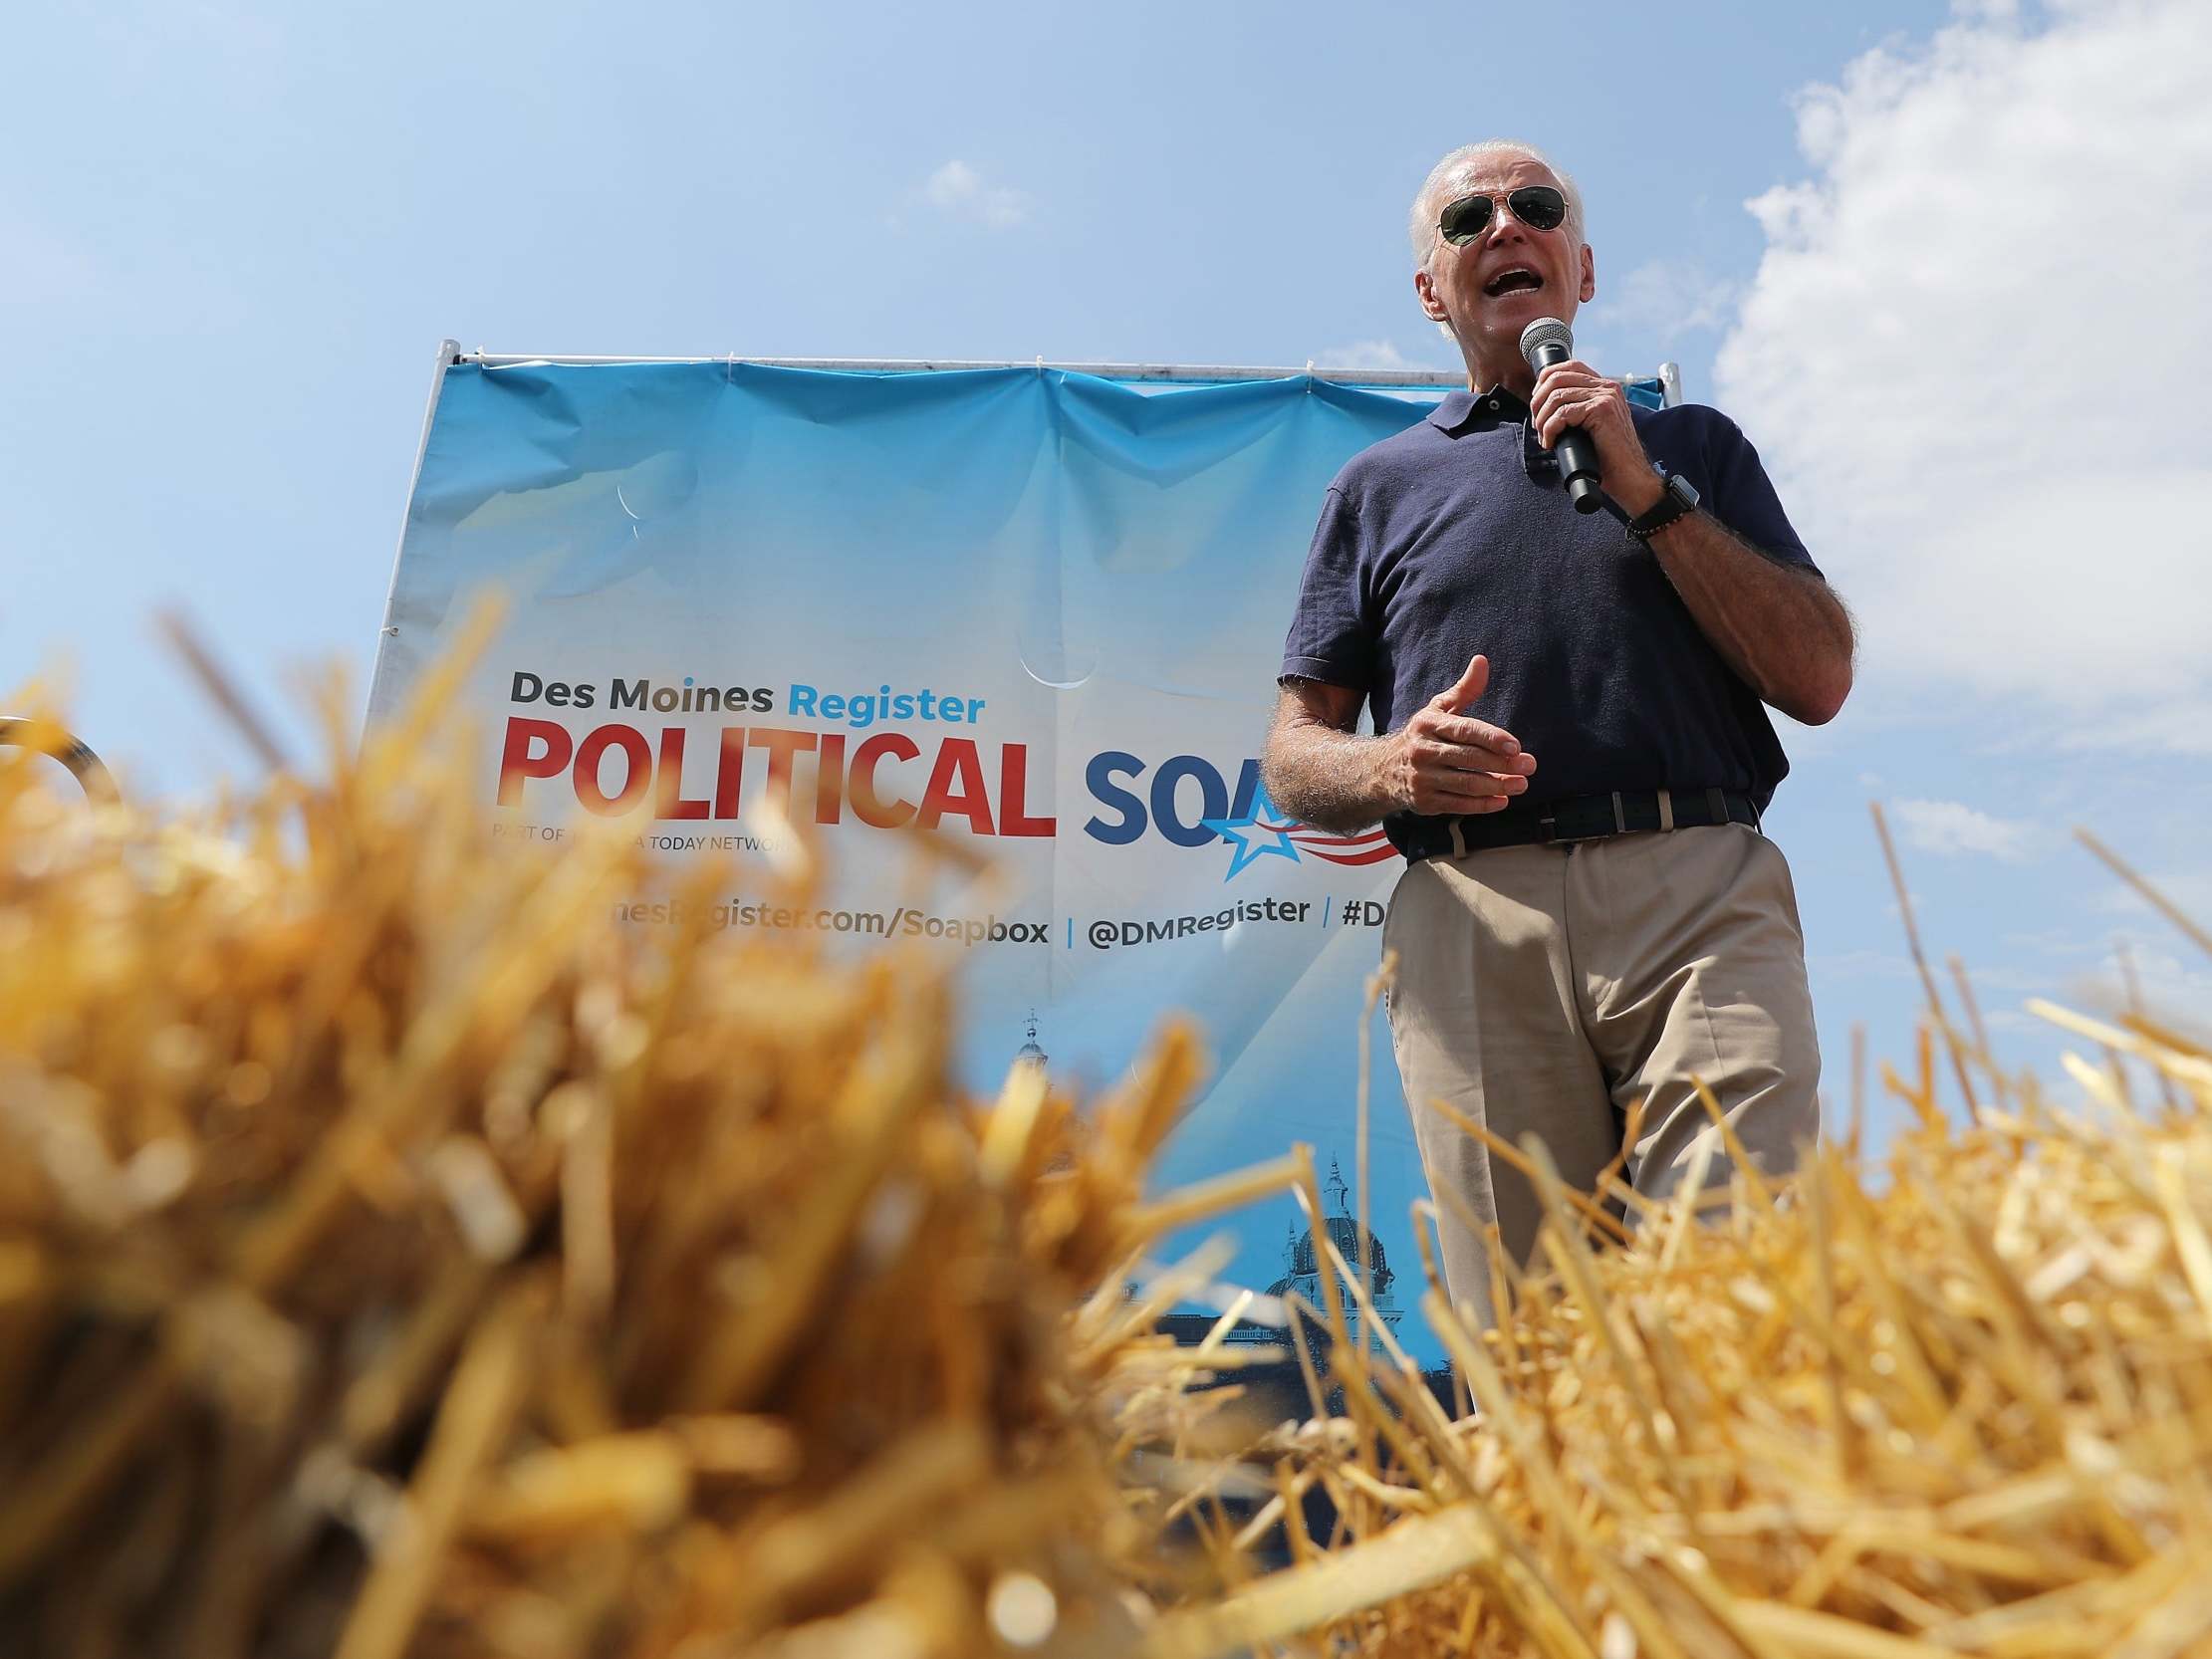 Joe Biden delivers a 20-minute campaign speech at the Des Moines Register Political Soapbox at the Iowa State Fair on Thursday